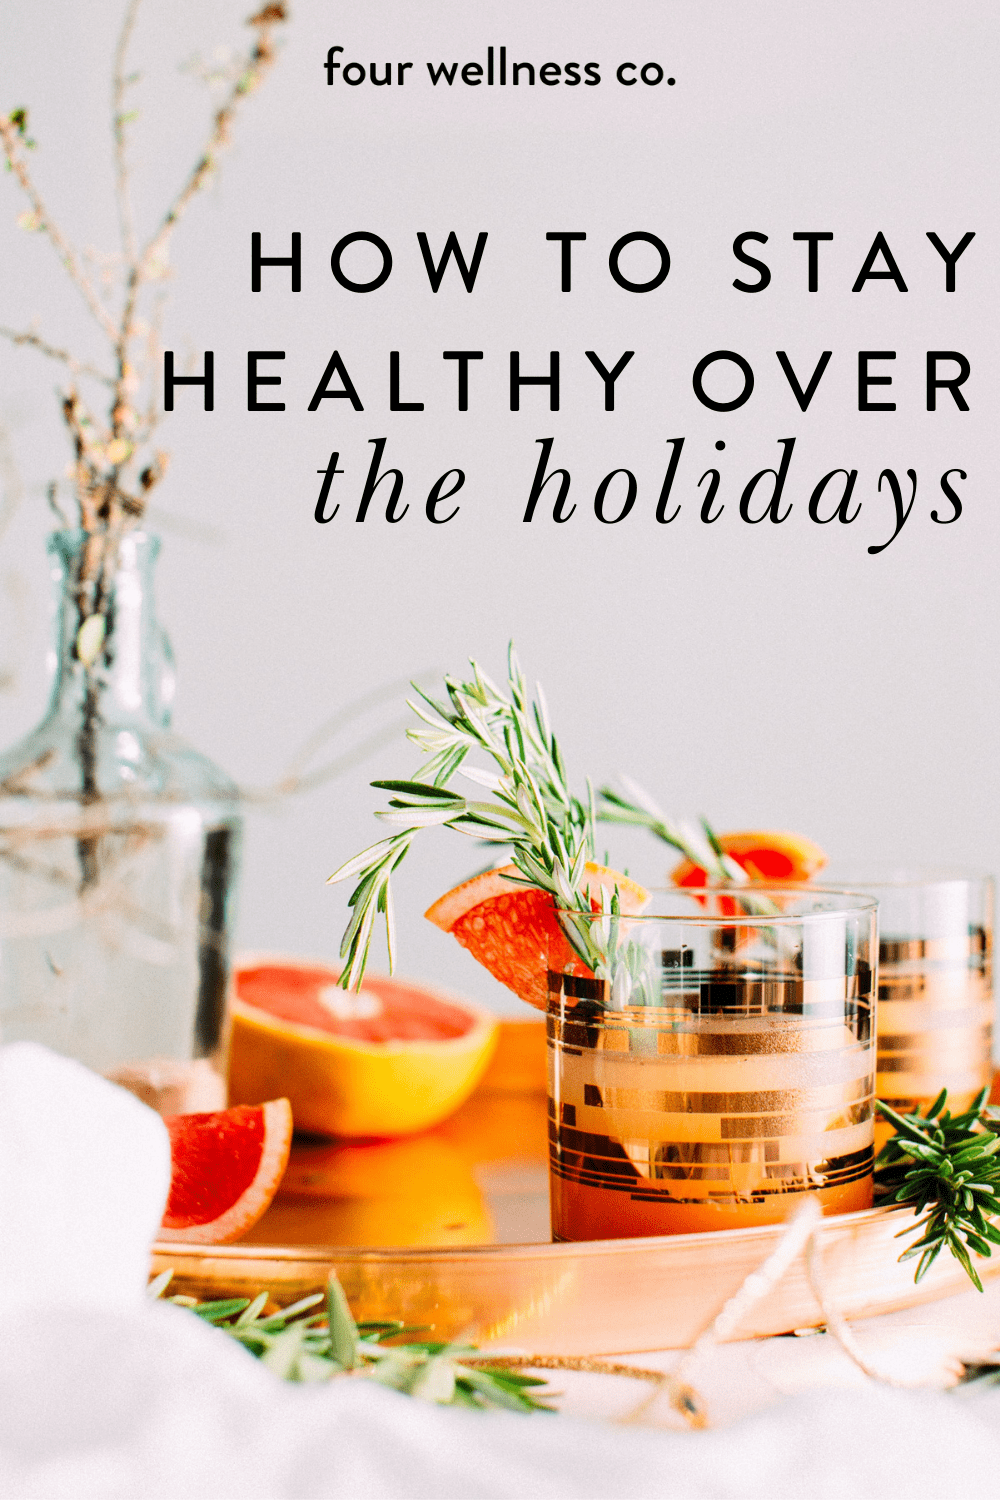 How to stay healthy over the holidays